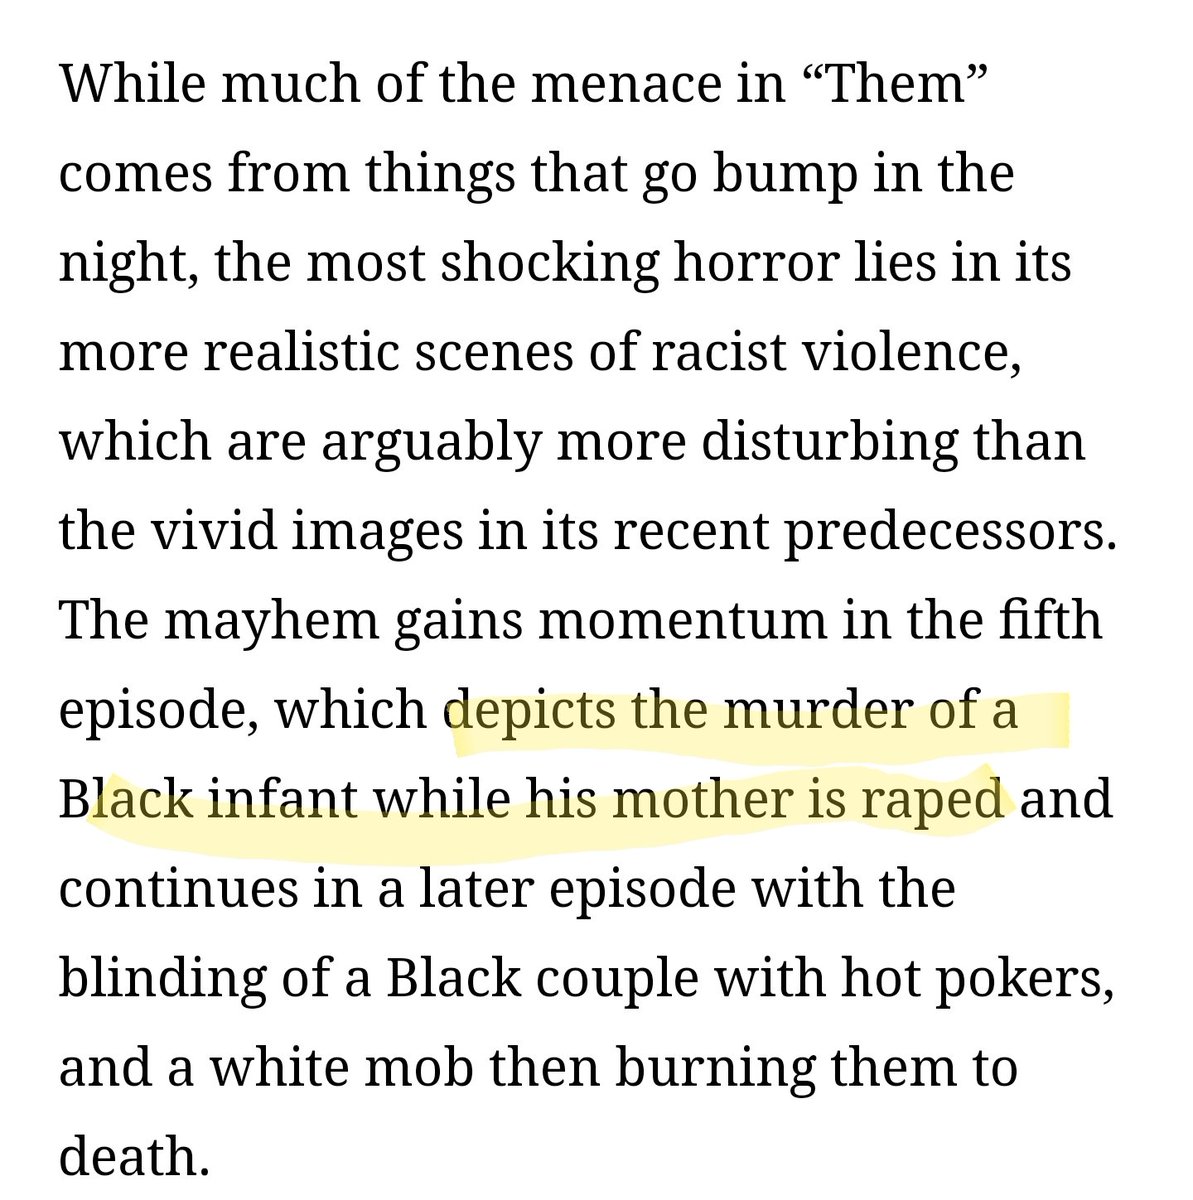 Whoa huge trigger warning for this What the fuck?? So it's a supernatural horror...but they decided it needed this realistic violence????? Nah this is twisted.